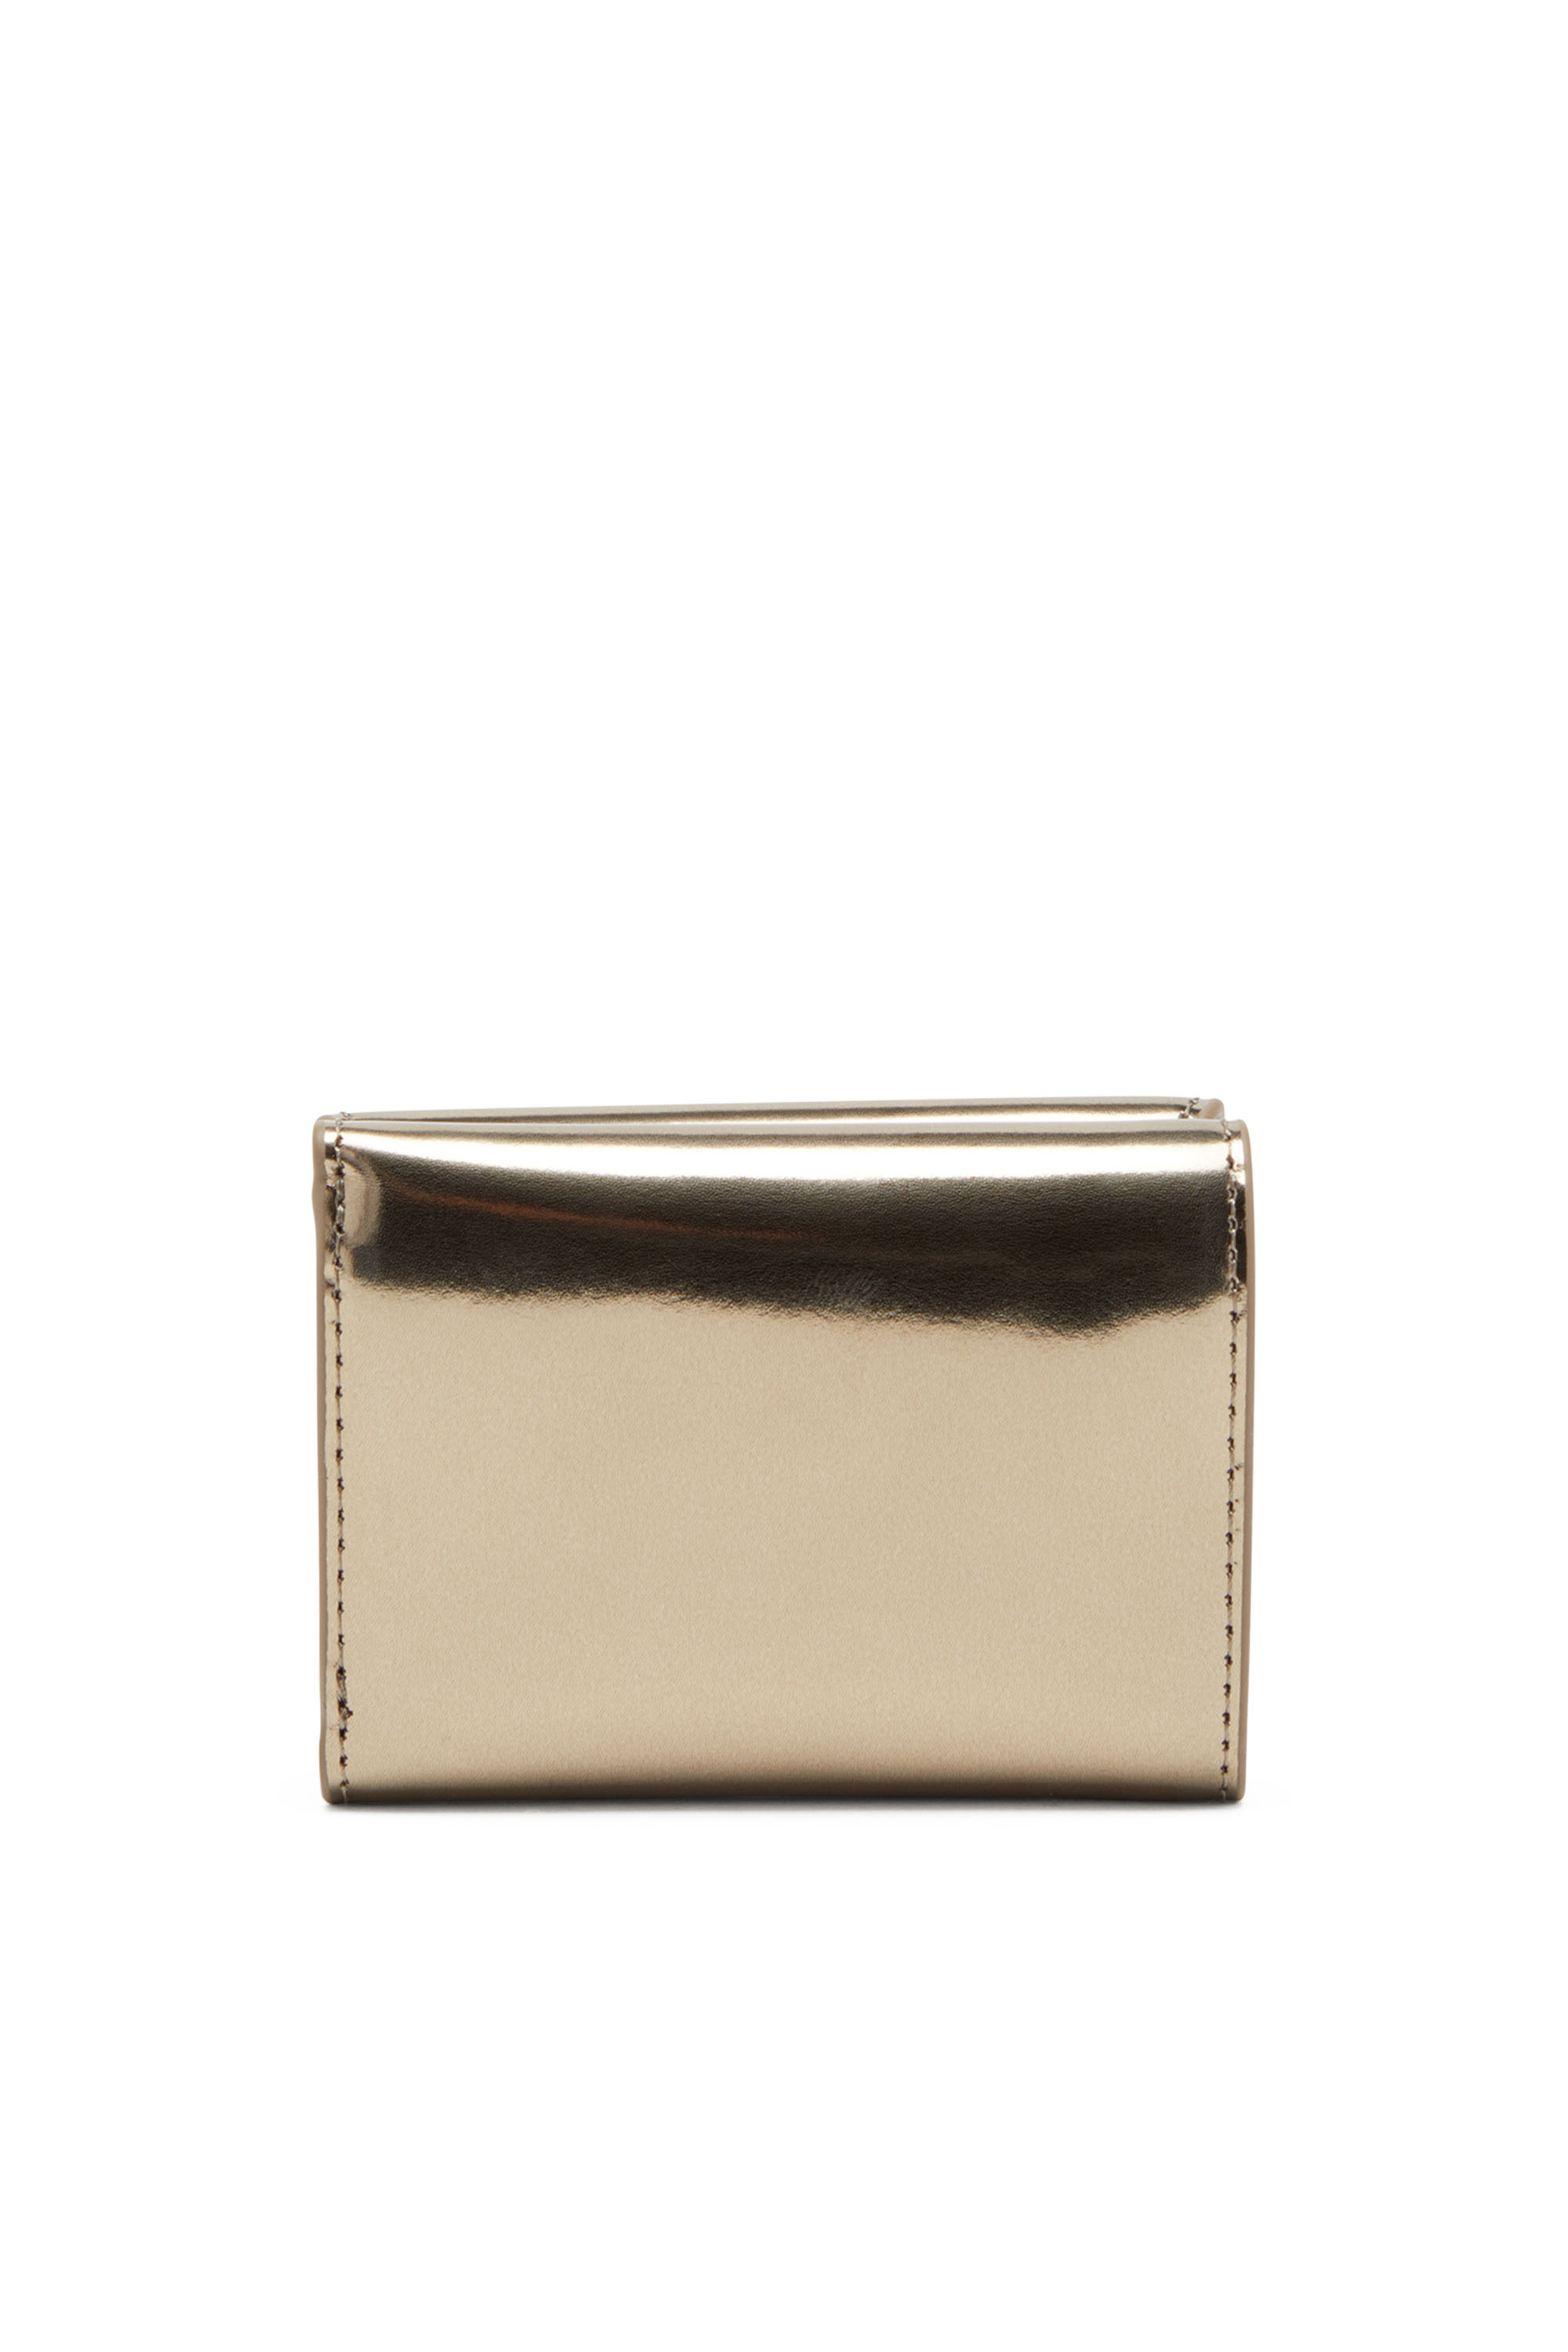 Diesel - 1DR TRI FOLD COIN XS II, Female Tri-fold wallet in mirrored leather in ブラウン - Image 2